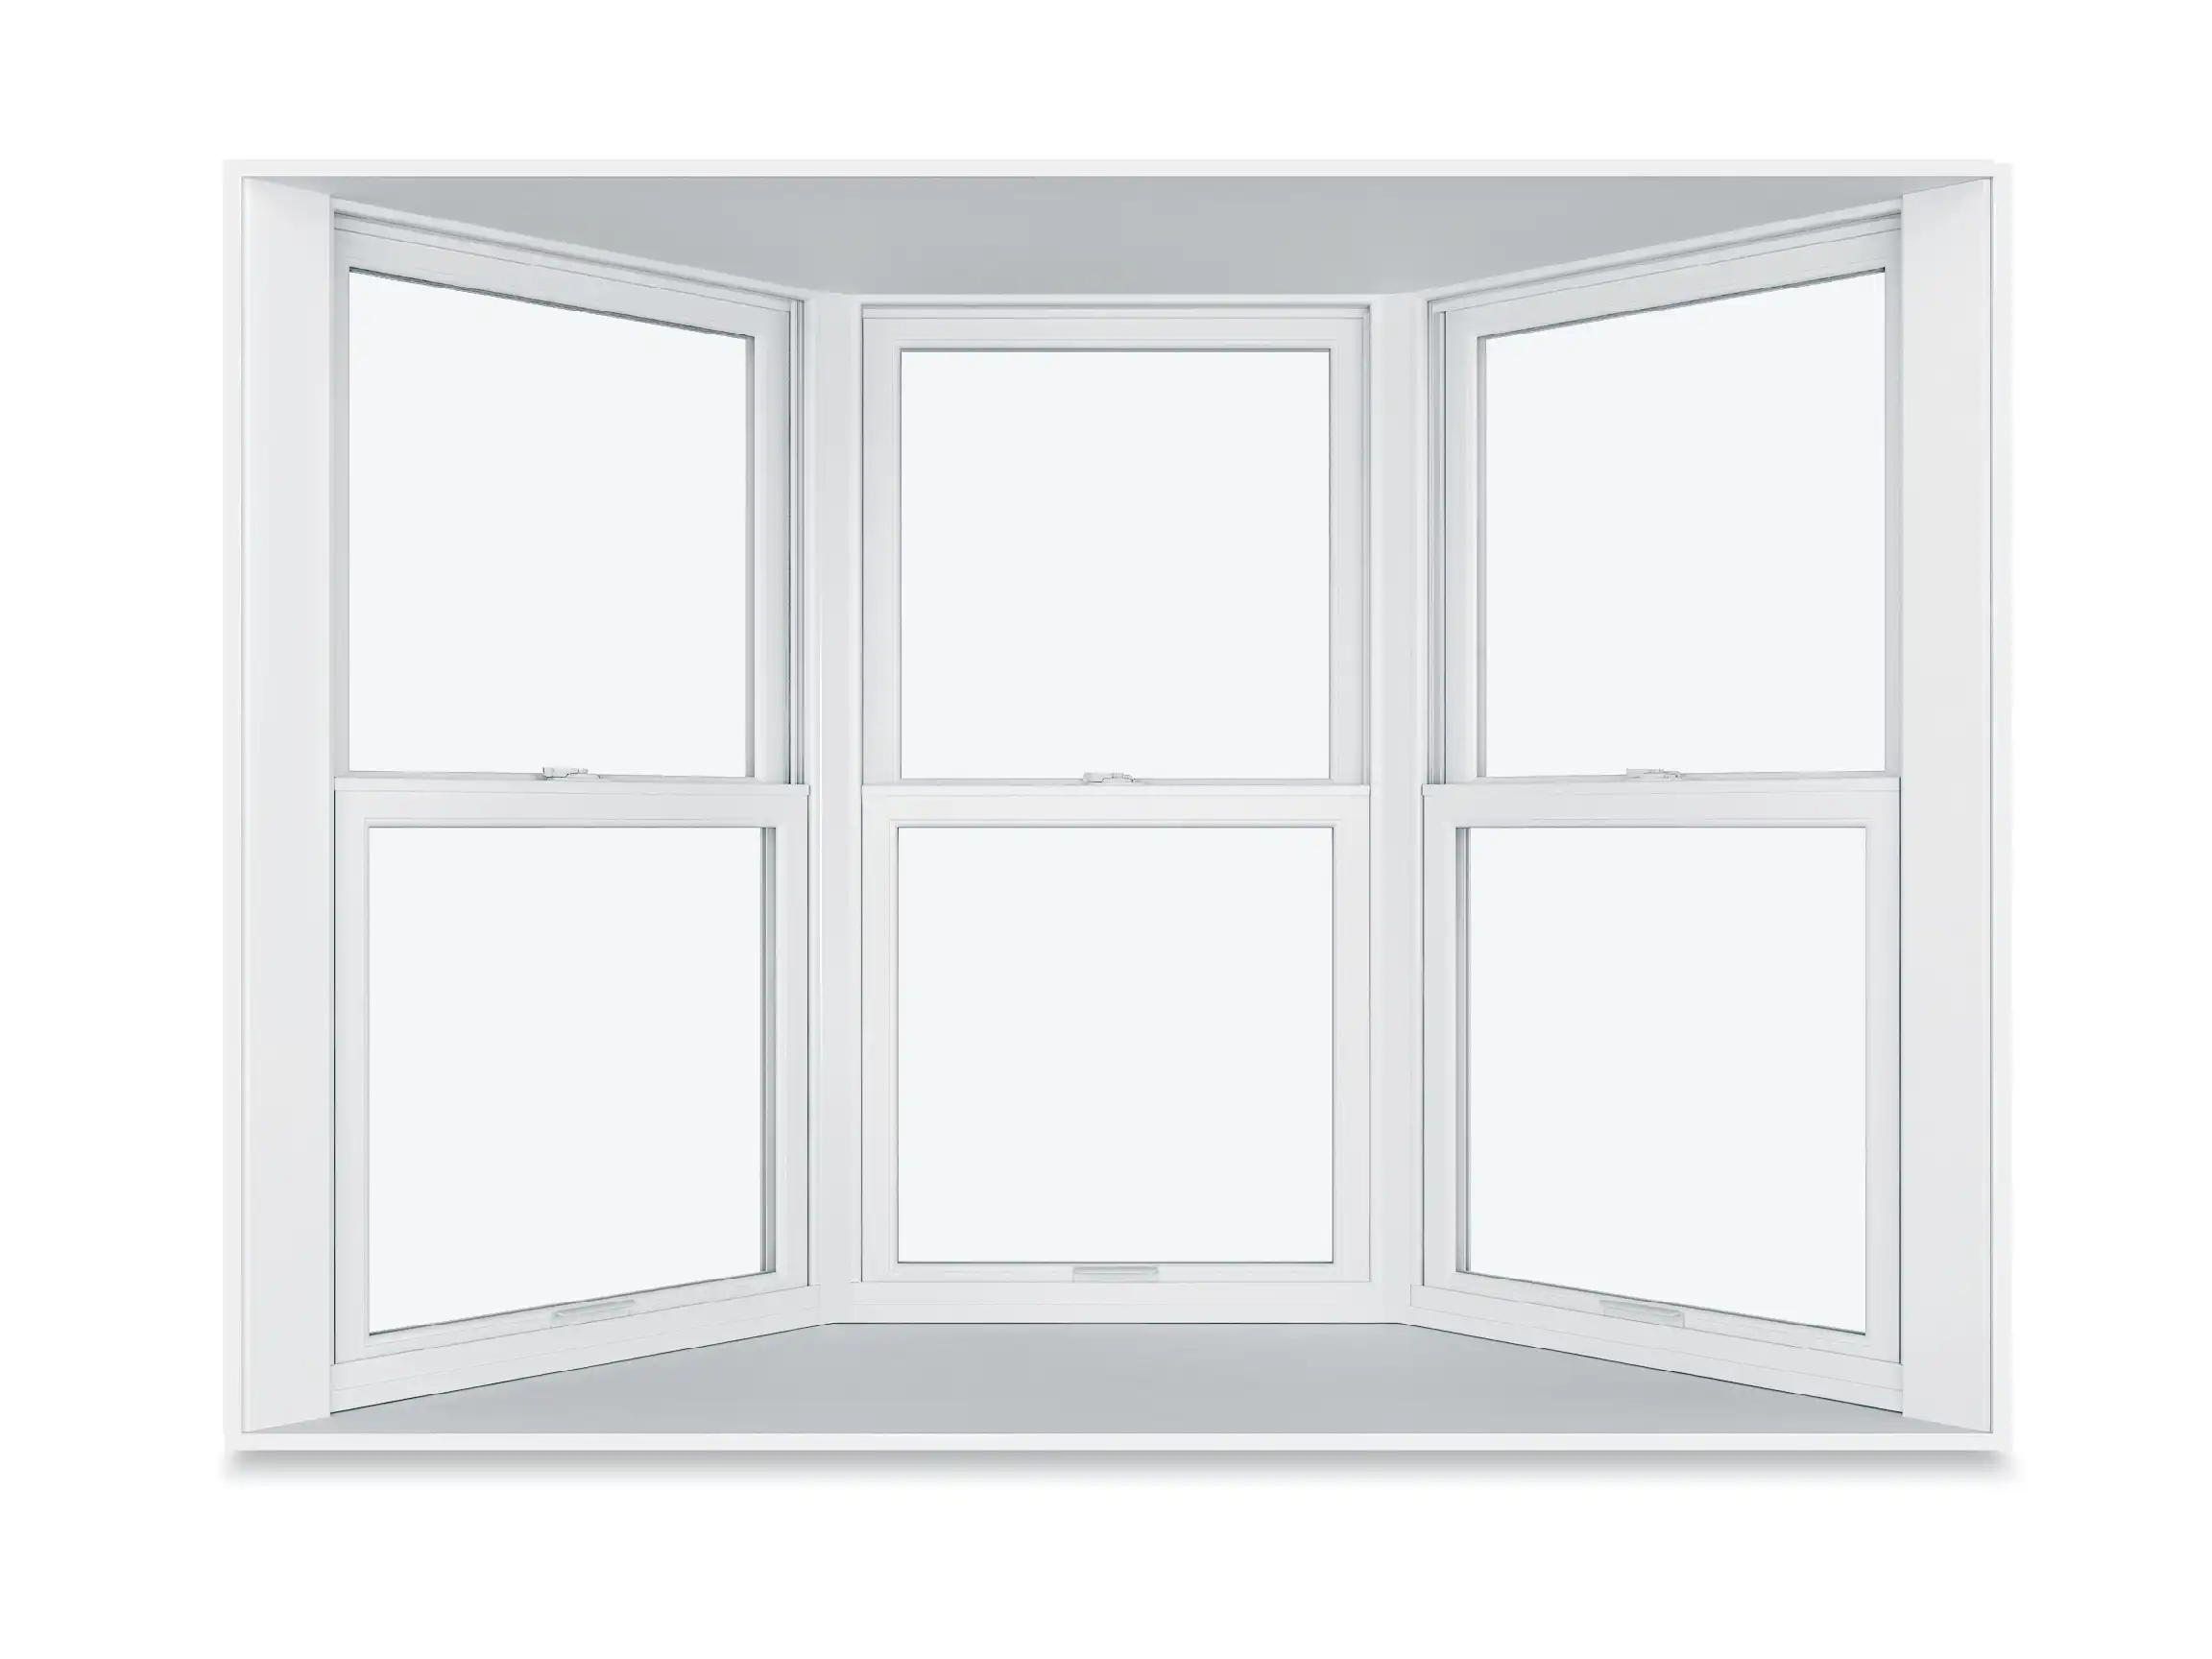 View of a white Marvin Replacement Bay window with three operating Double Hung windows.